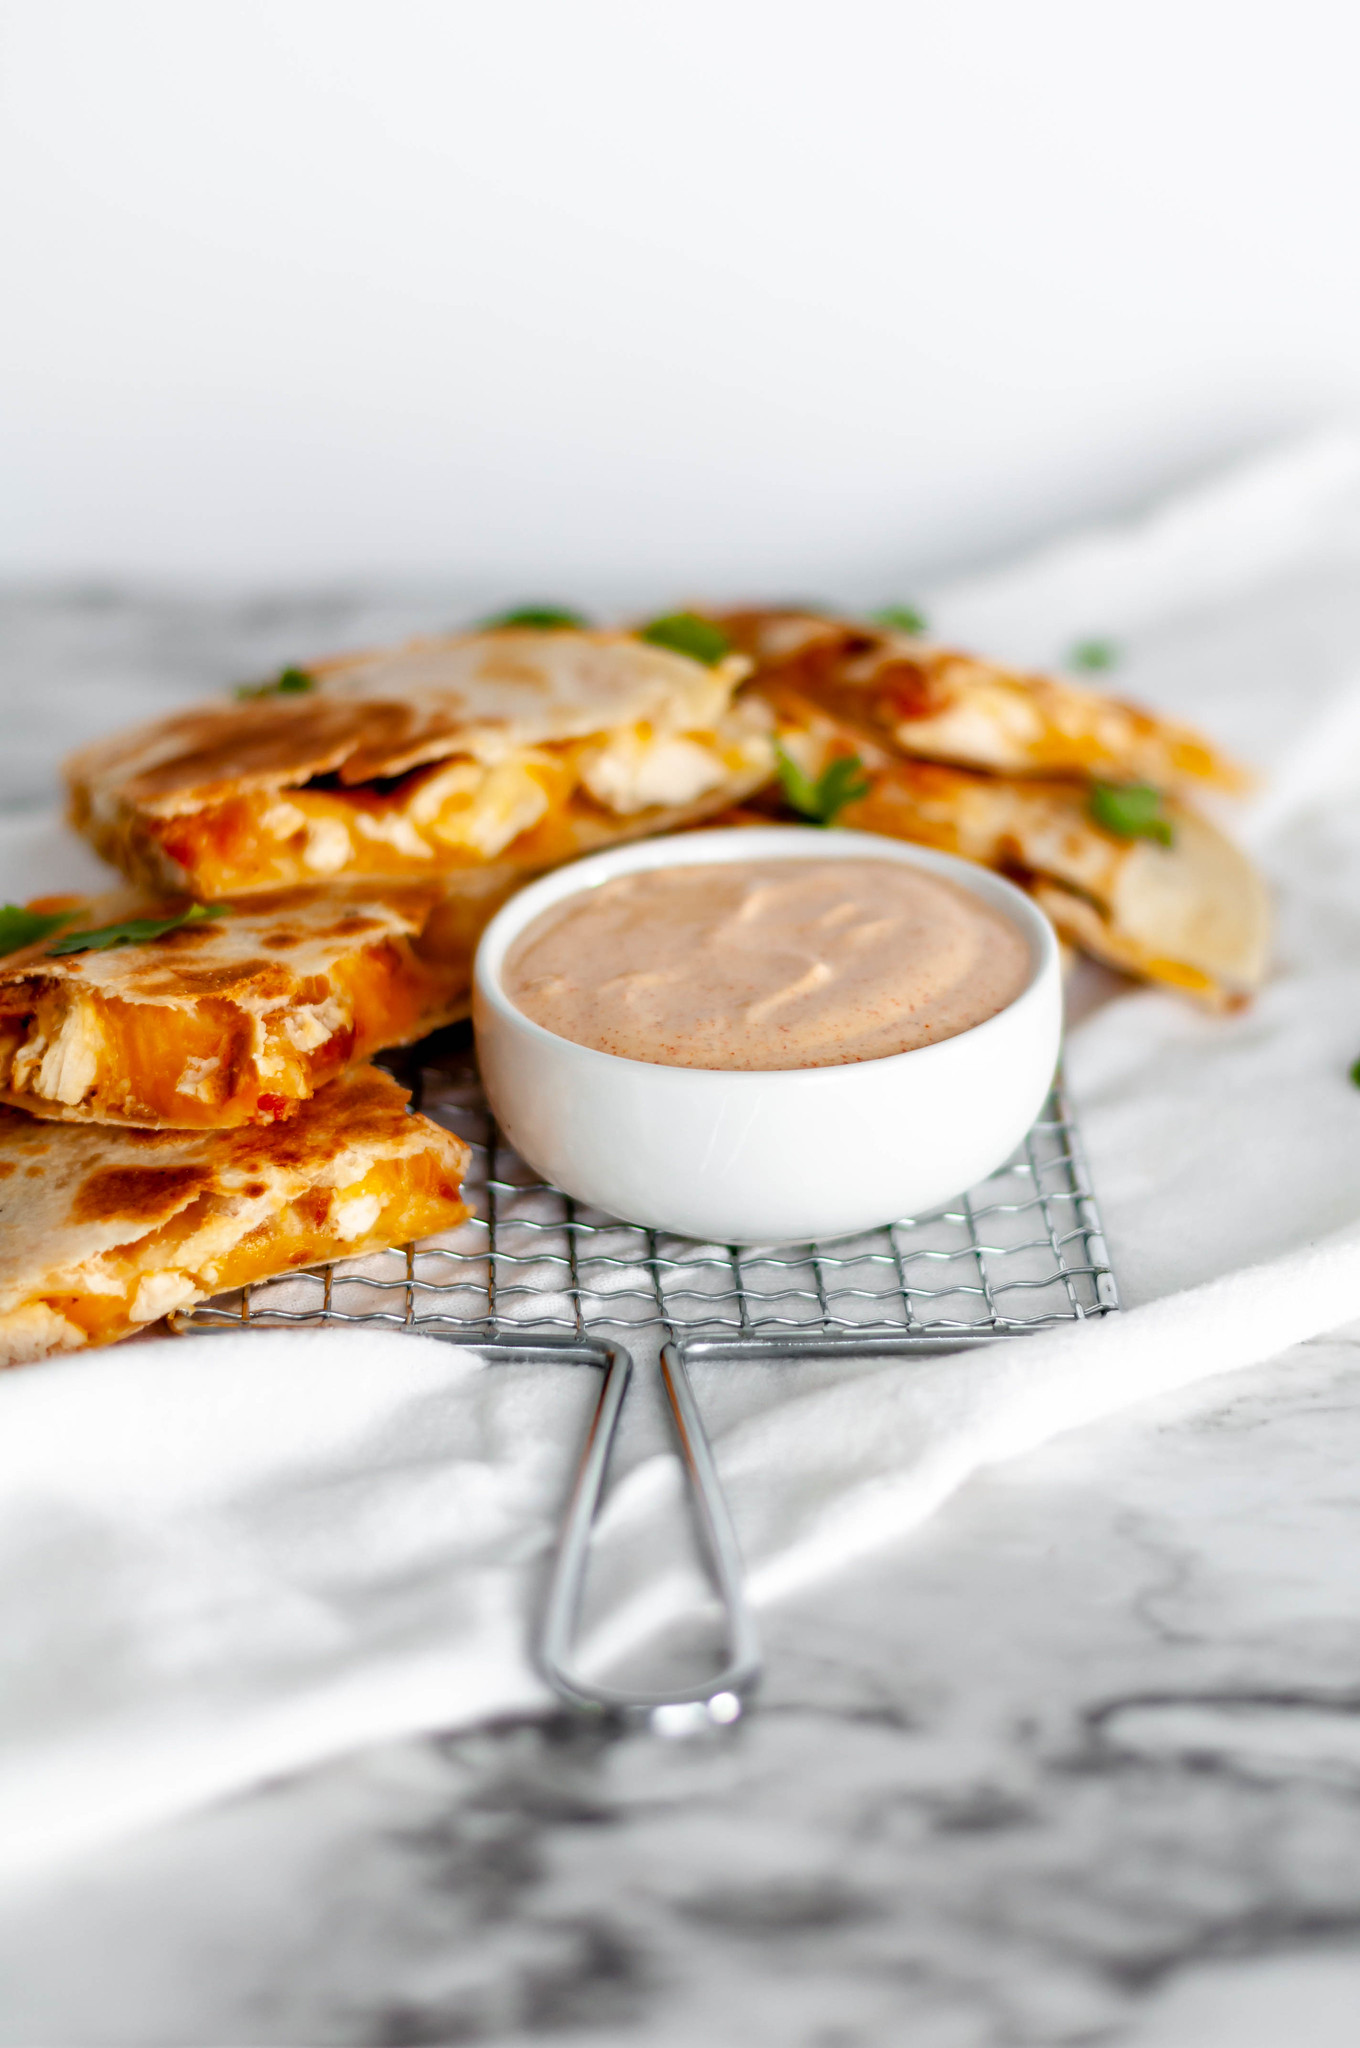 This copycat Taco Bell Quesadilla Sauce is just like the real deal and so simple to make at home. Spice up your favorite quesadilla with this yummy sauce.